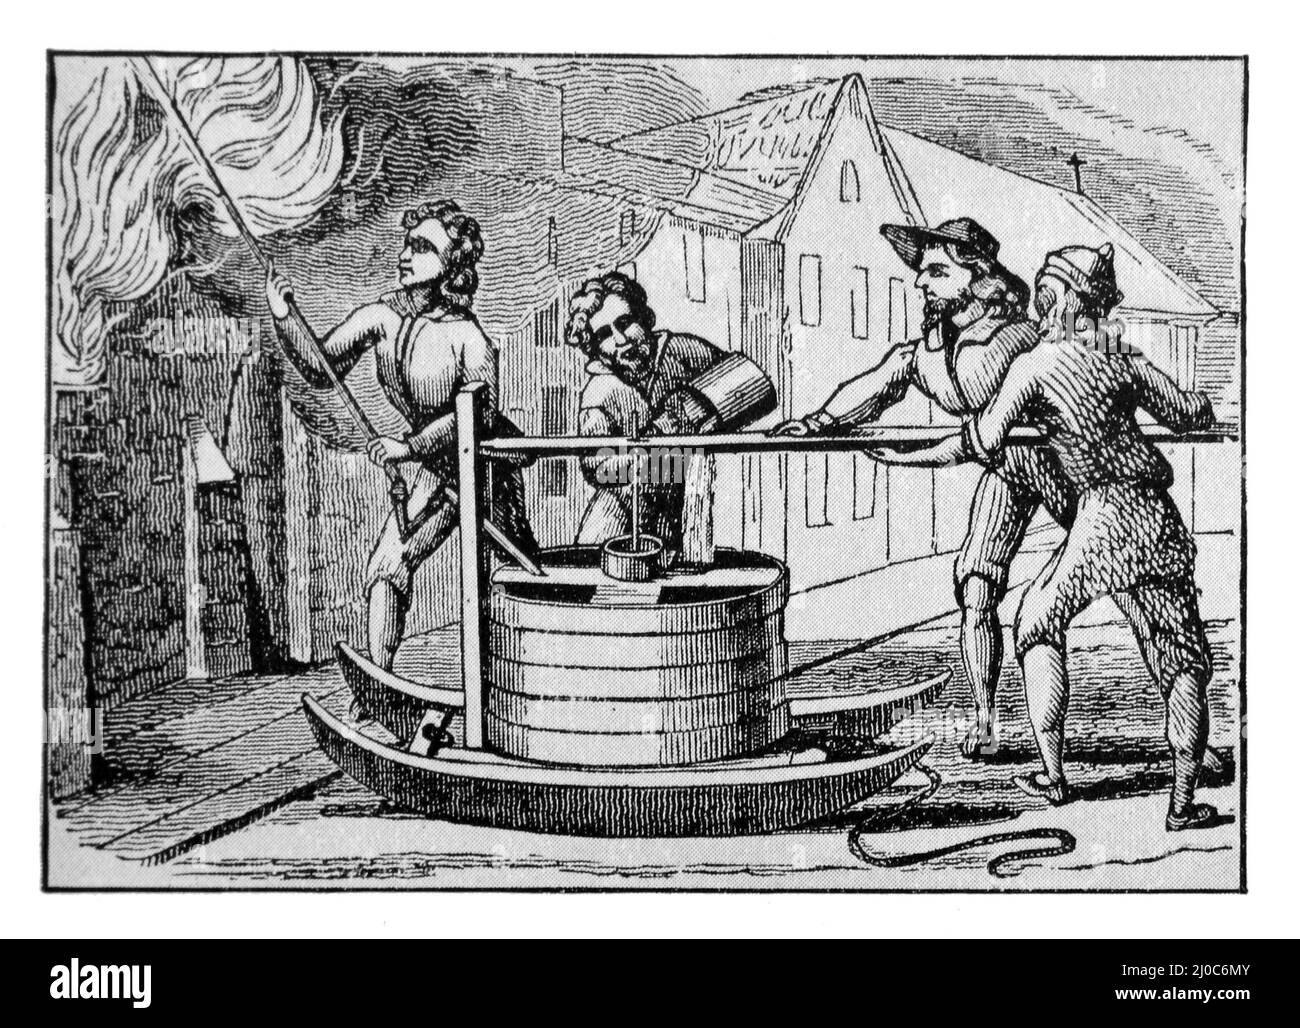 A German Fire Pump of 1615: Black and White Illustration; Stock Photo